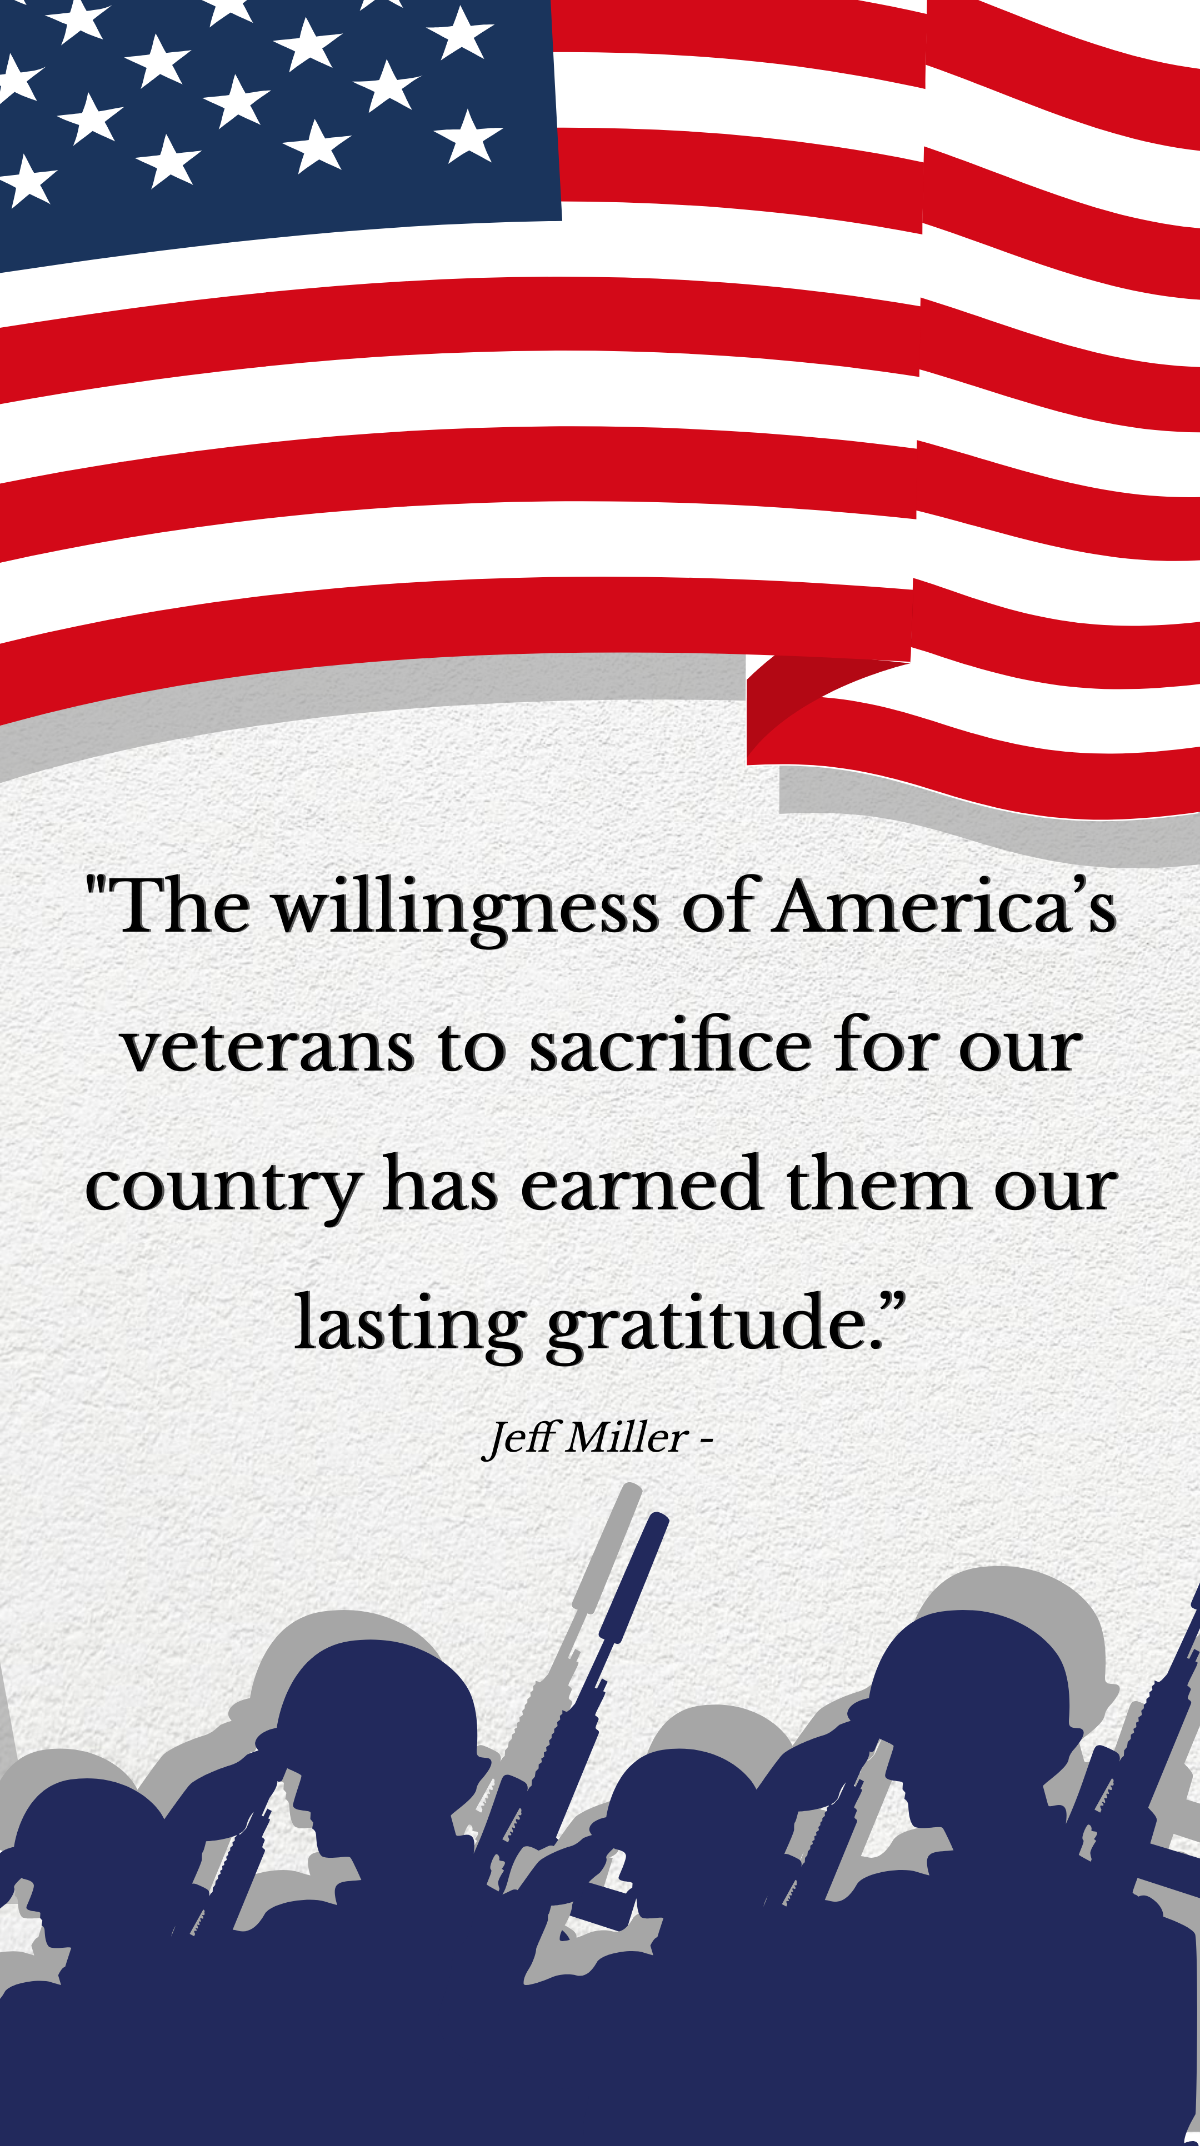 Jeff Miller - The willingness of America’s veterans to sacrifice for our country has earned them our lasting gratitude.”